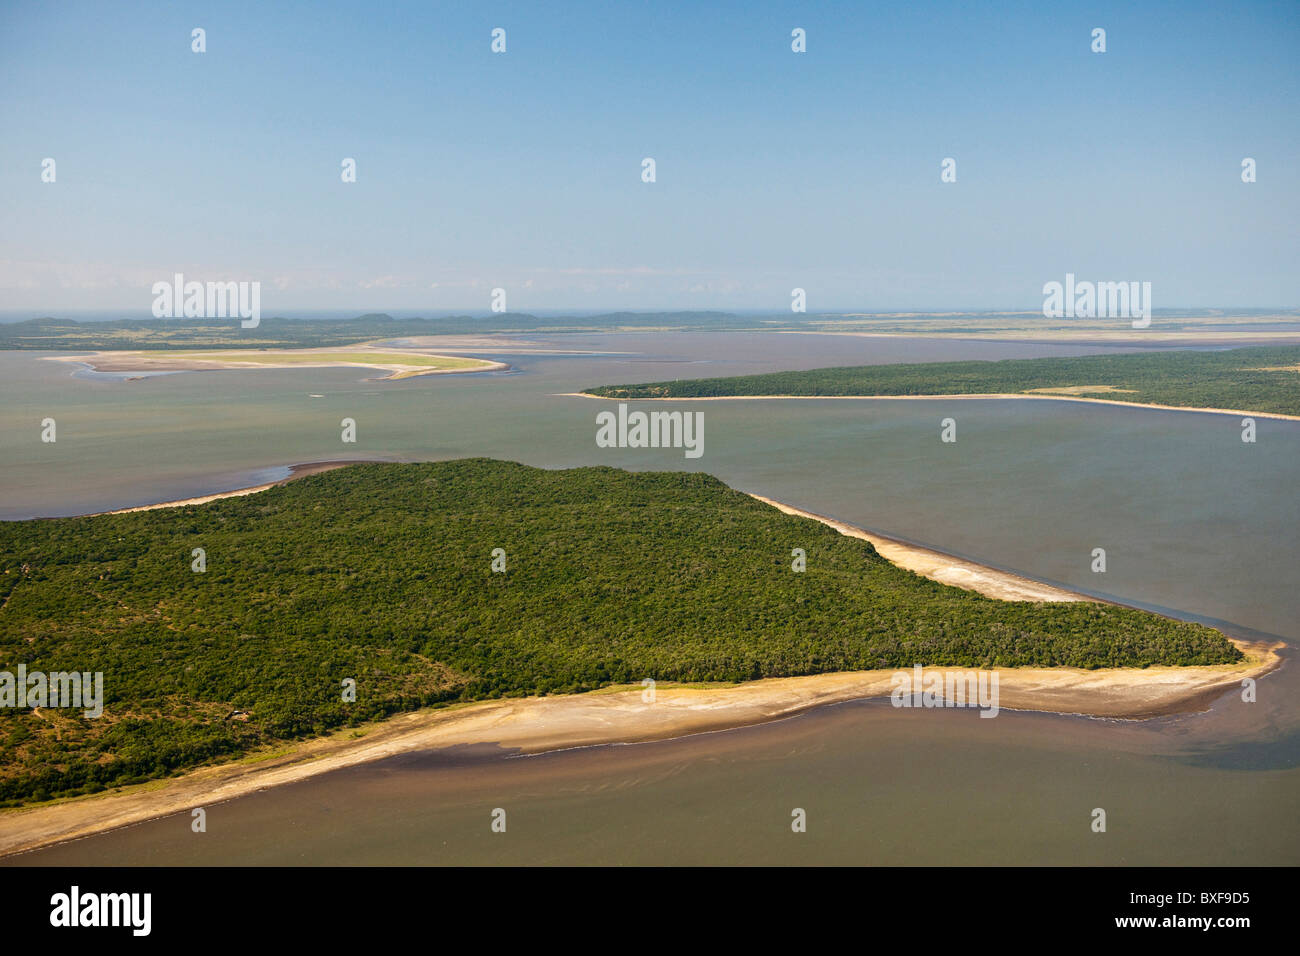 Aerial view of the iSimangaliso Wetland Park showing Hells Gates between Lake St Lucia and False Bay Stock Photo